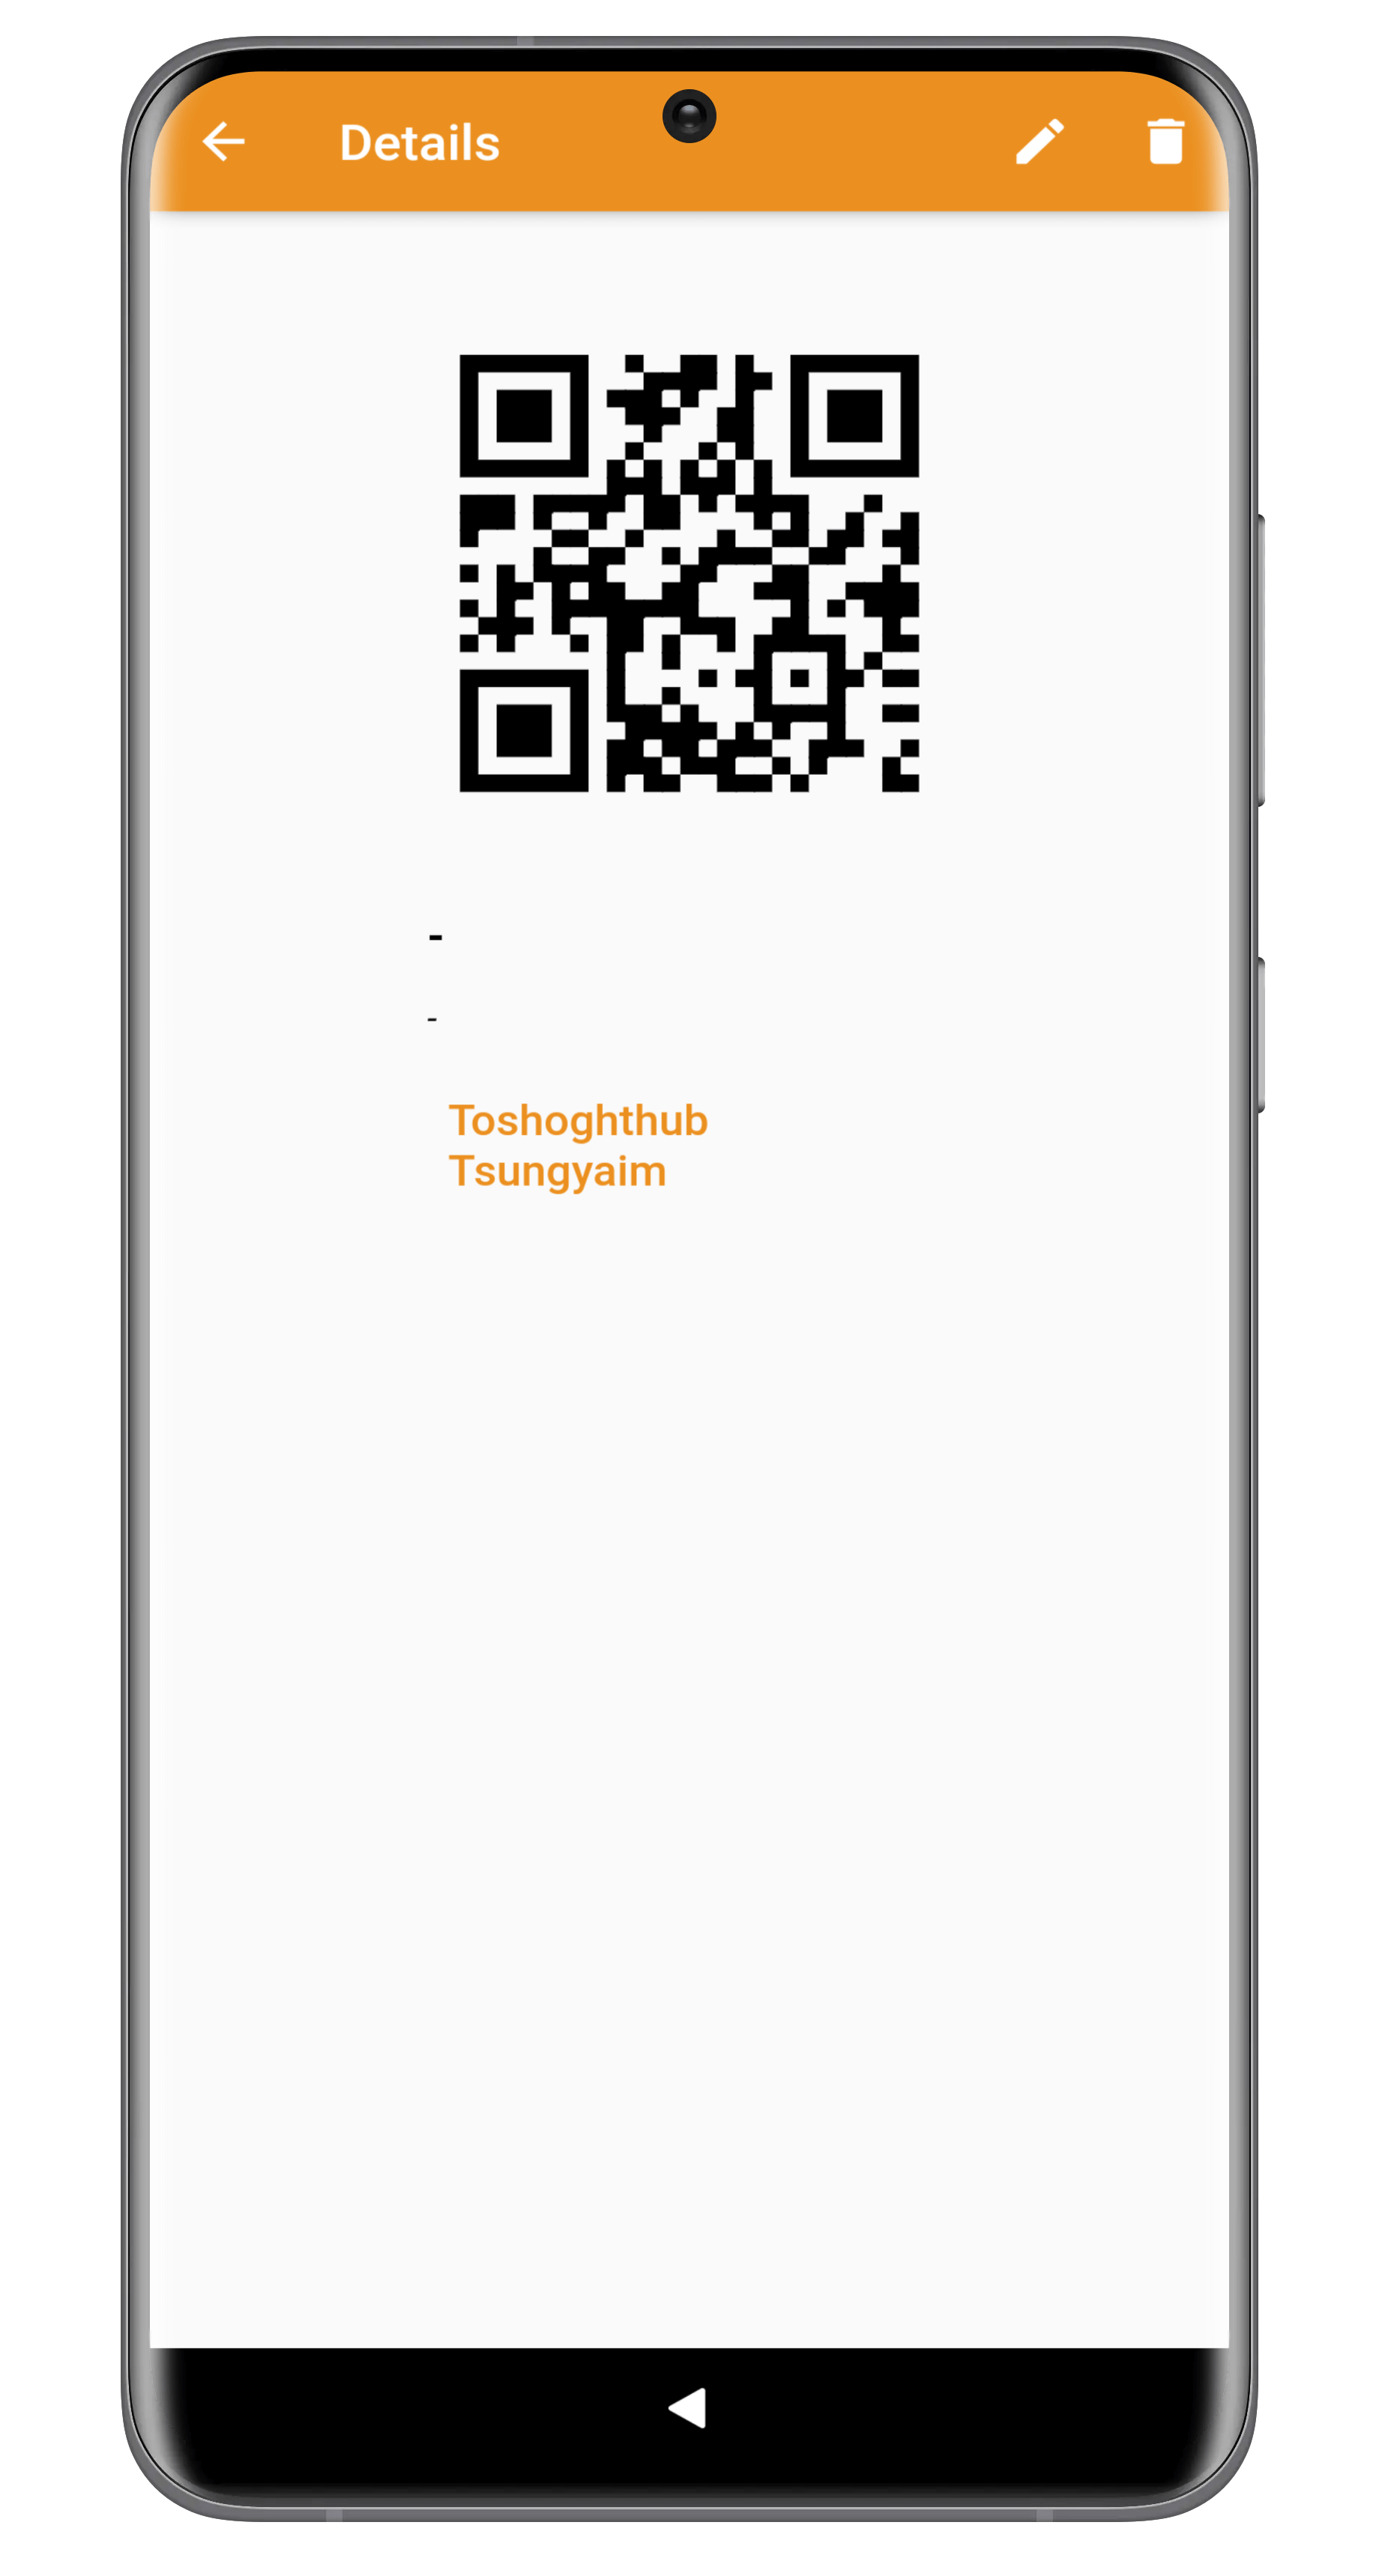 Linkaya difficult-to-spell name preview screen with QR code